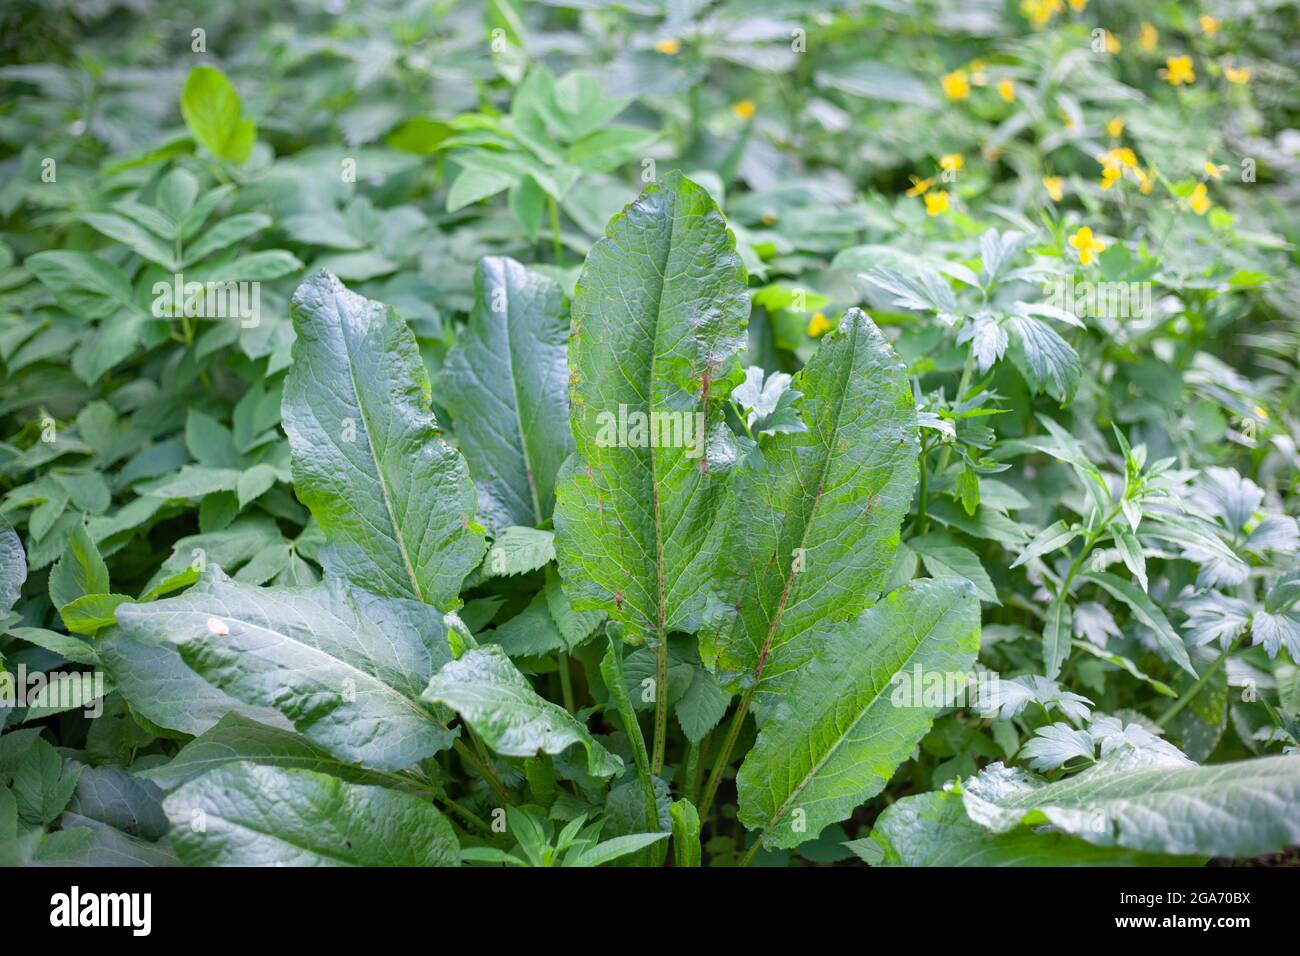 Burdock plant. Thickets of summer plants. Beauty of nature. Stock Photo